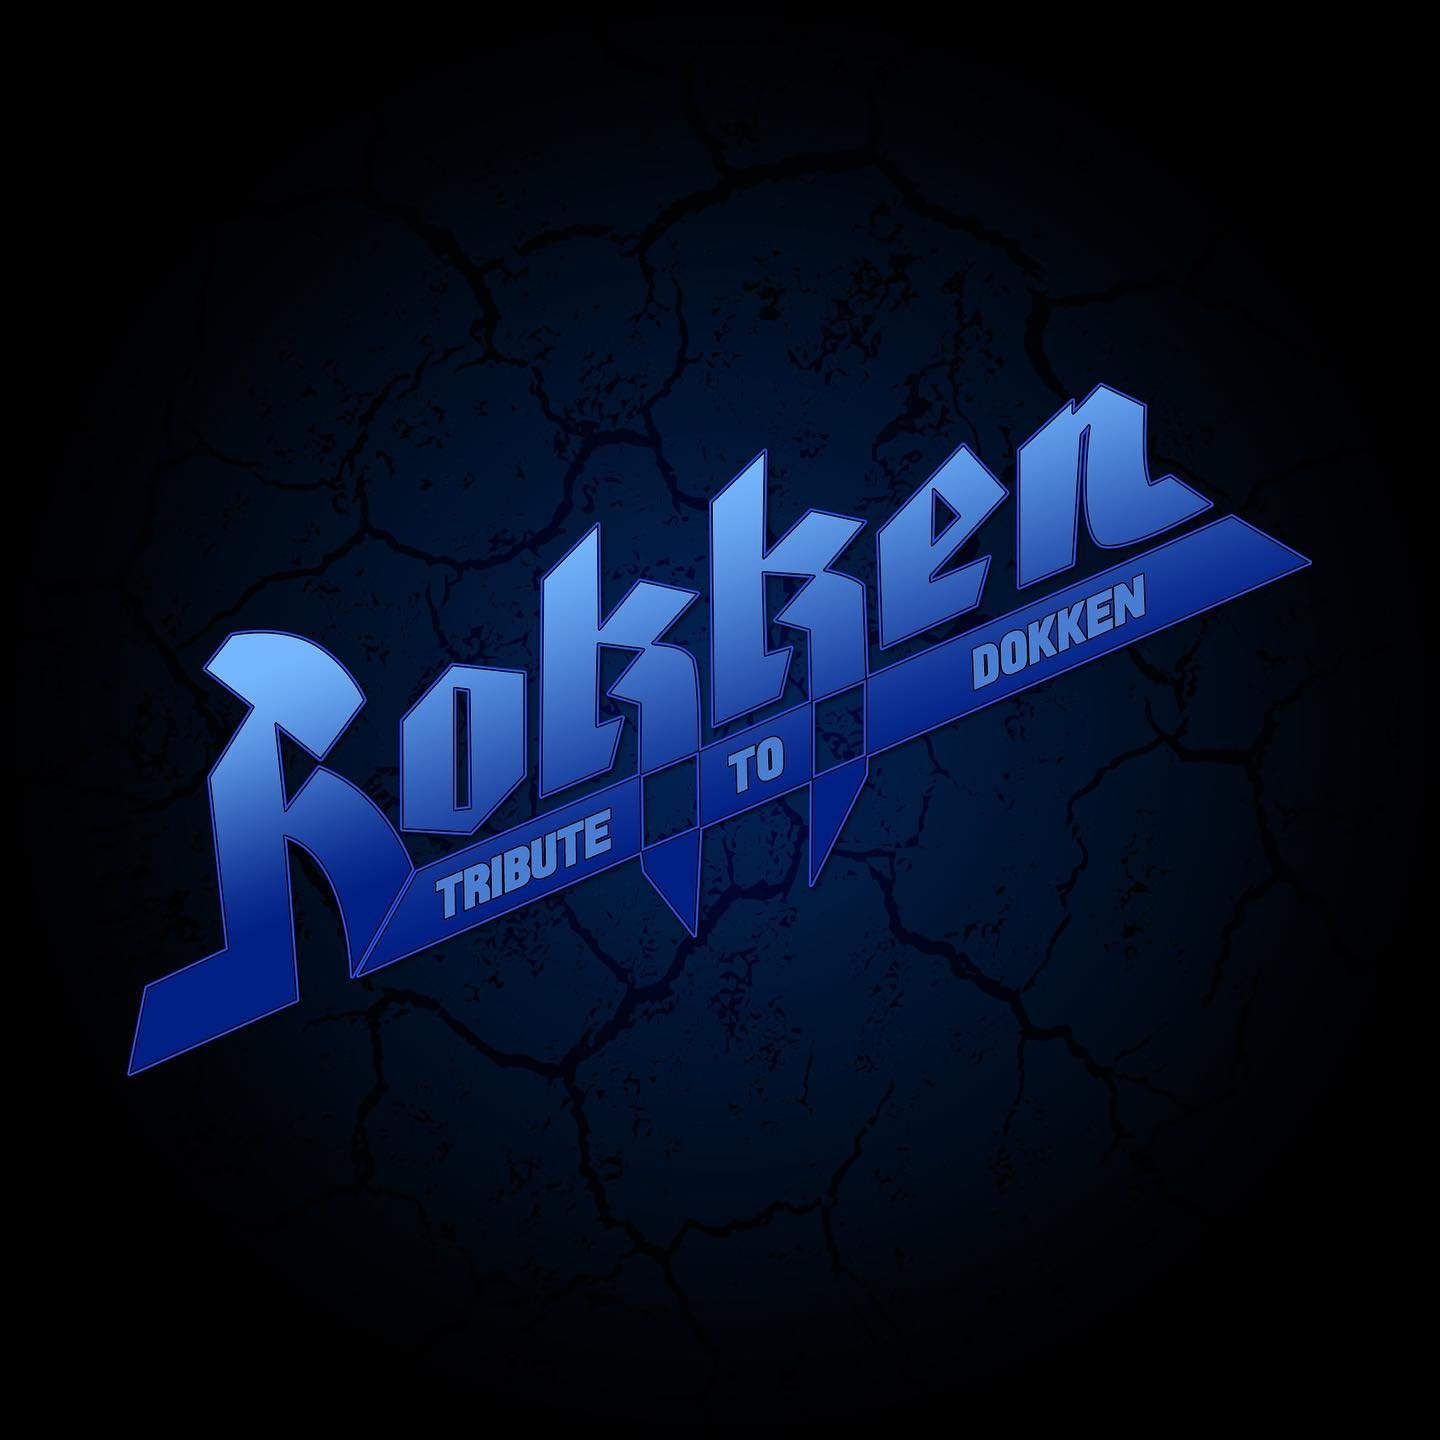 New logo design for a new tribute to Dokken 🤘🏻